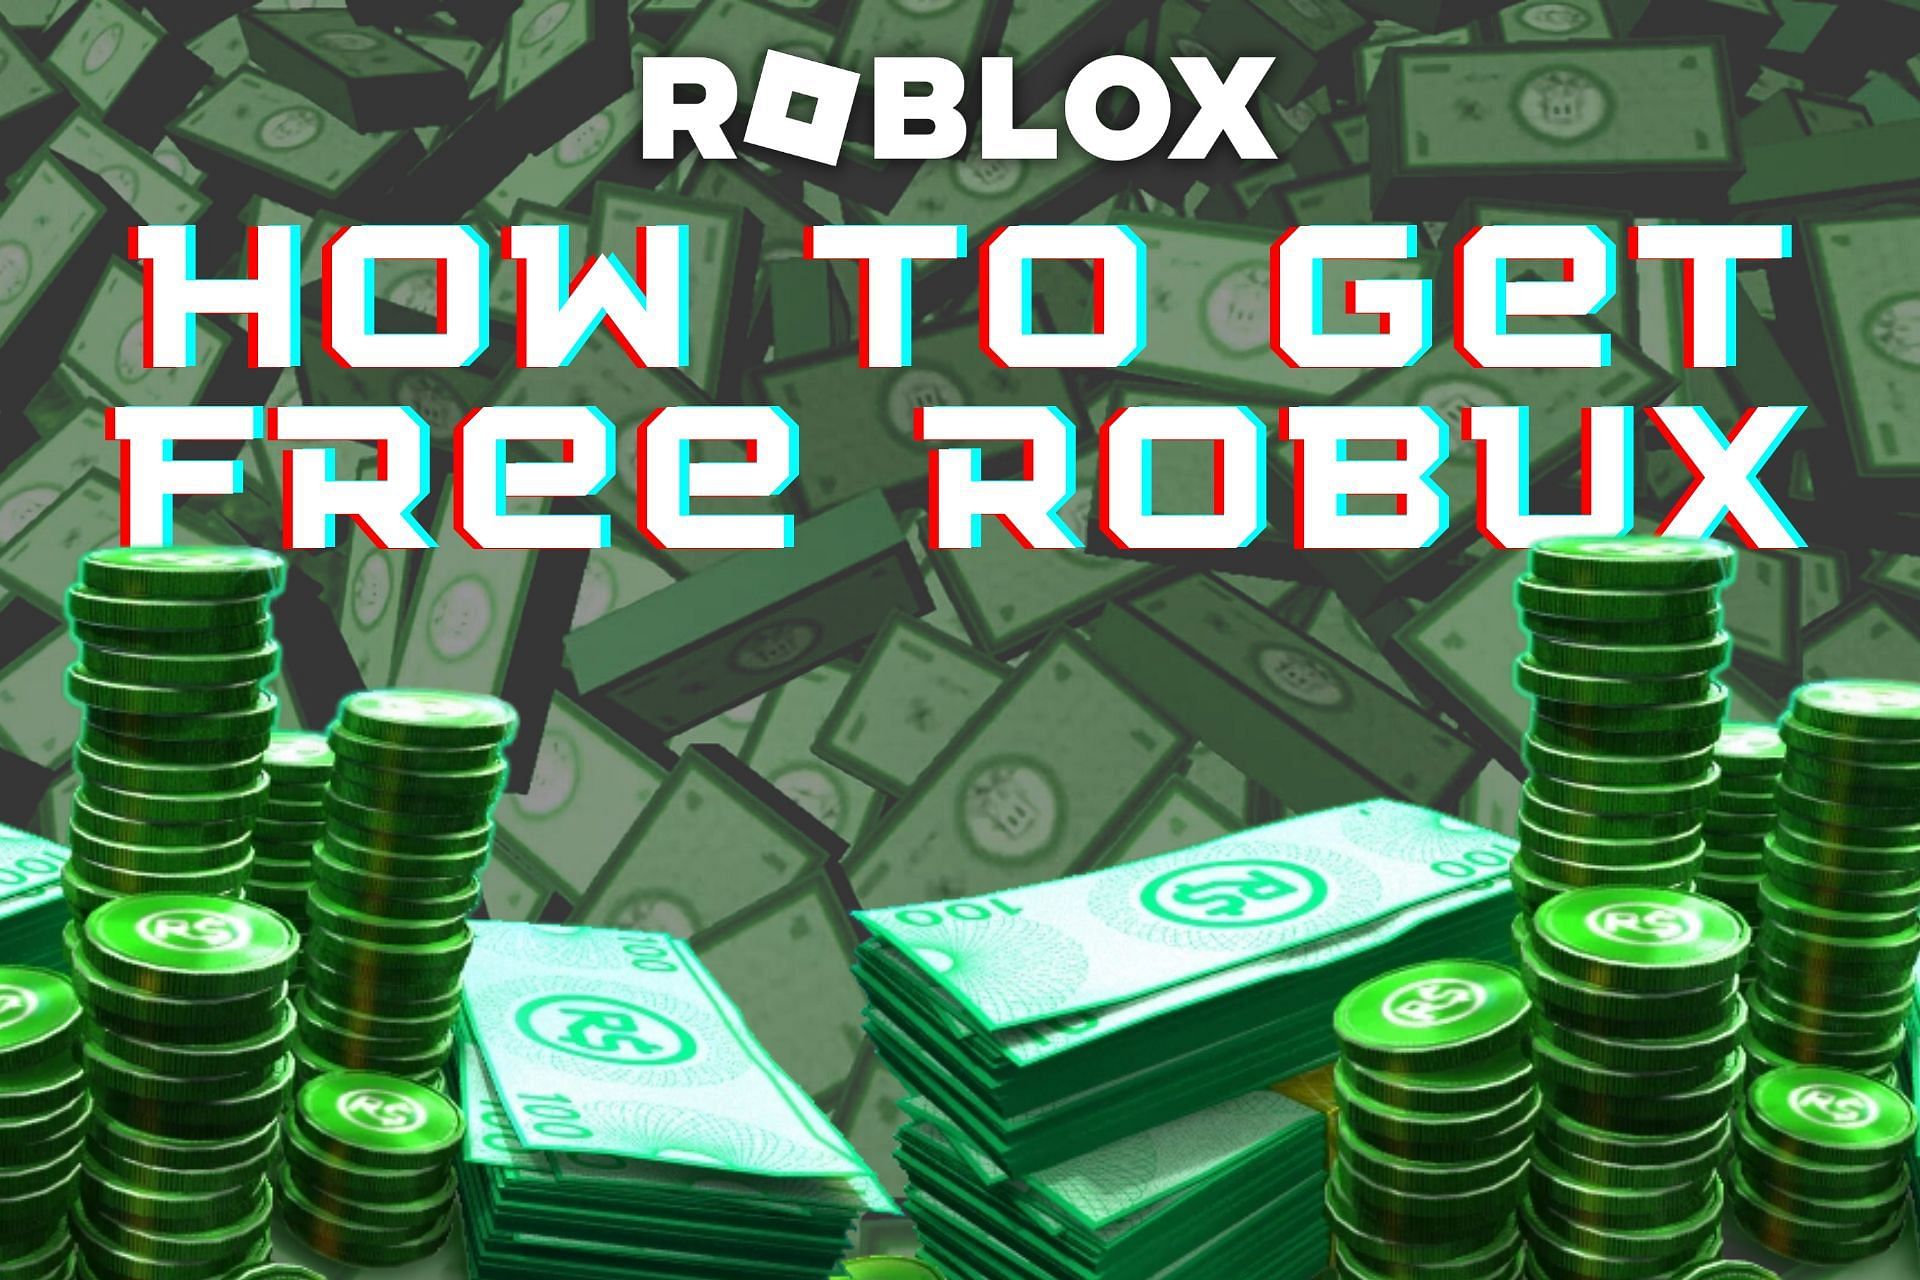 How to earn free Robux in Roblox platform.